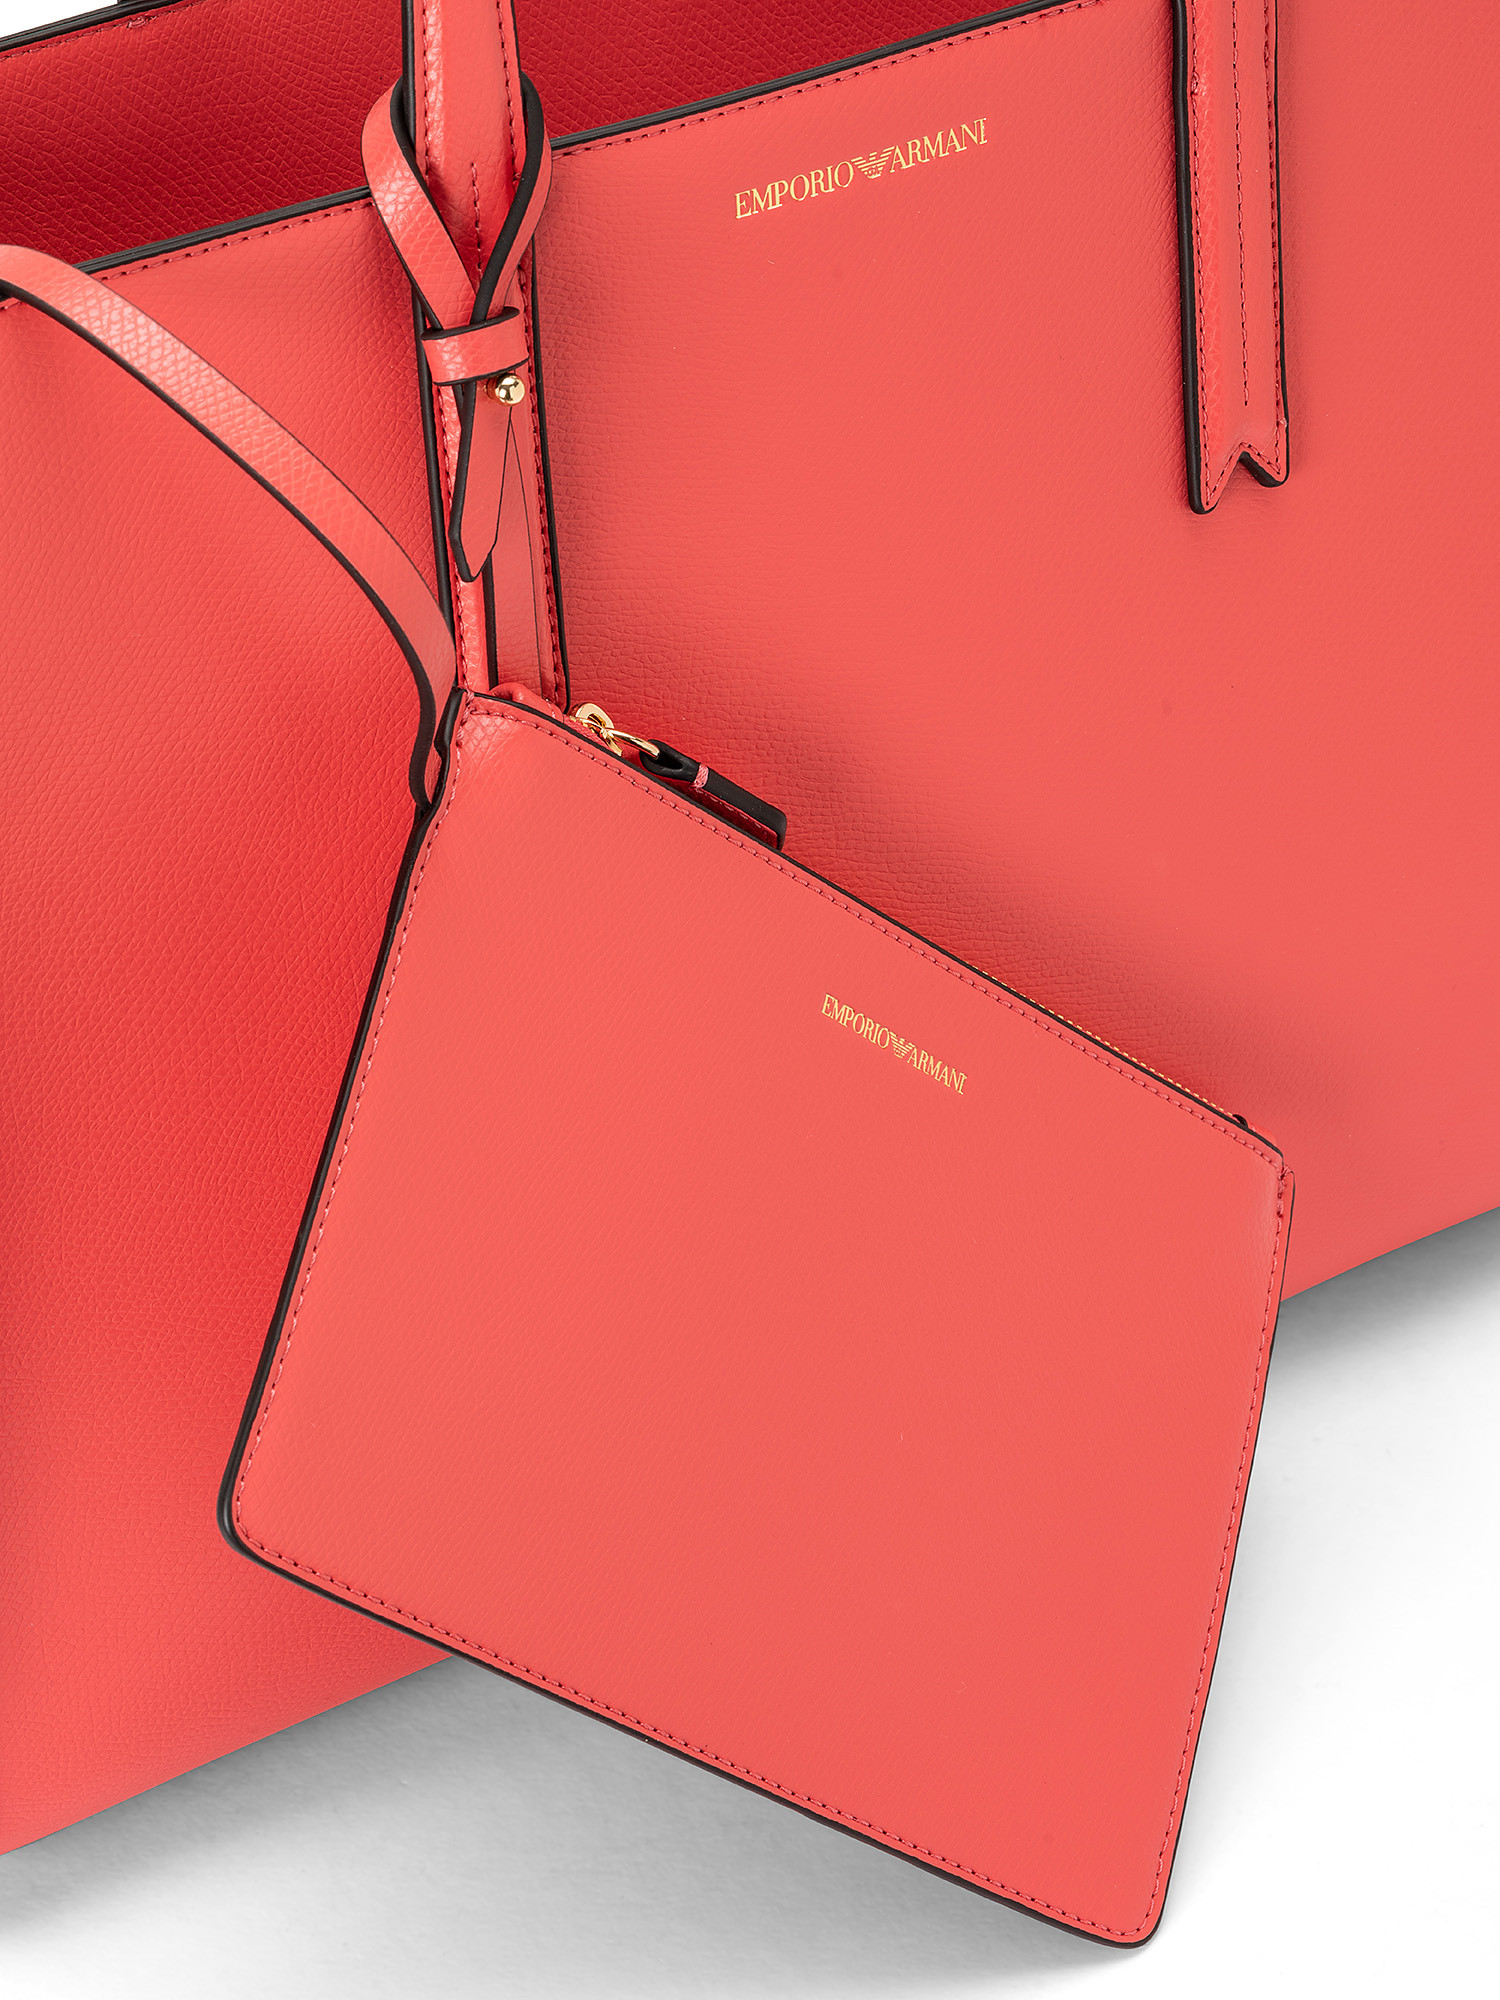 Shopping bag, Coral Red, large image number 2